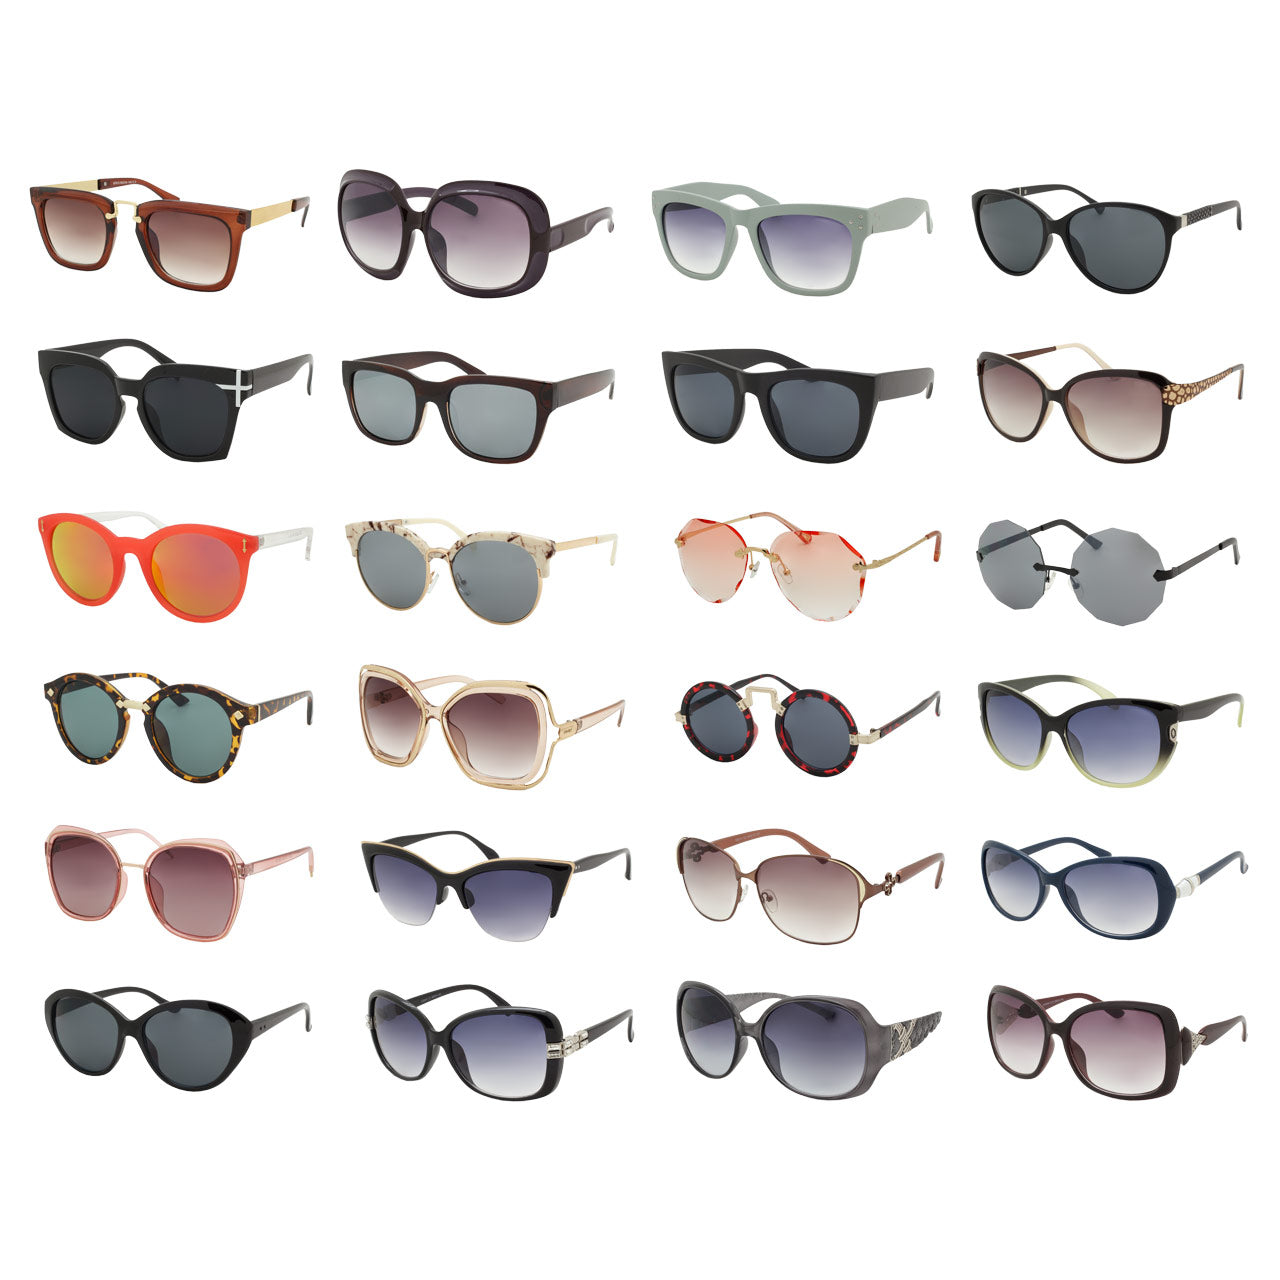 Buy MIX #1 TRENDY WOMEN'S ASSORTED UV400 SUNGLASSES (Sold by the 6 PC OR 12 PC LOT)Bulk Price